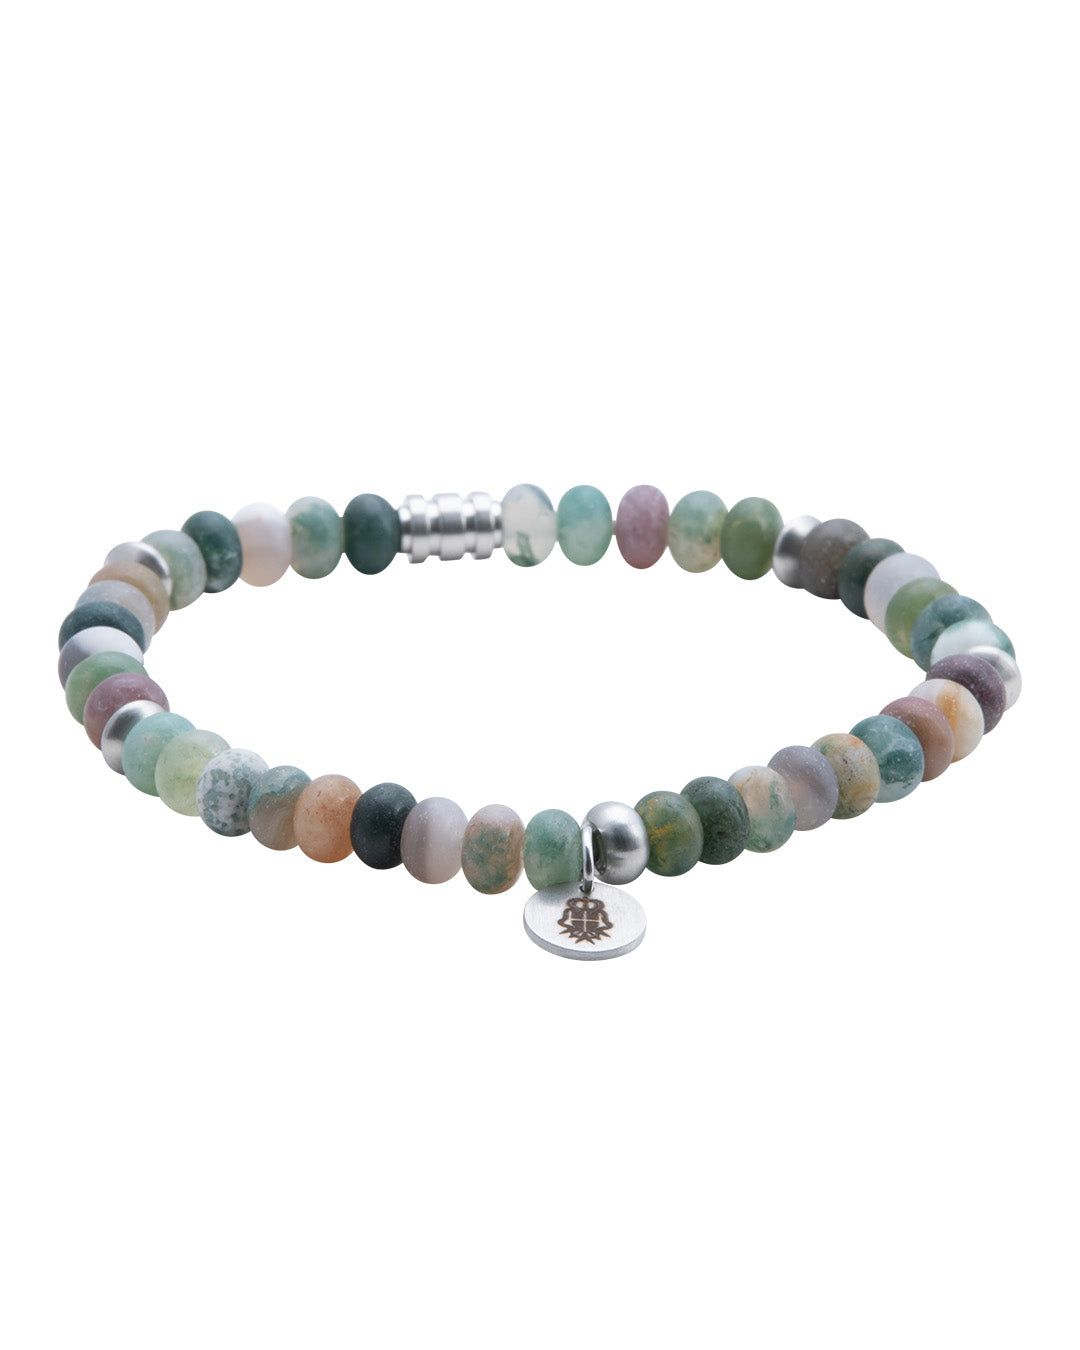 Green Agate Stone Bead Bracelet With Charm